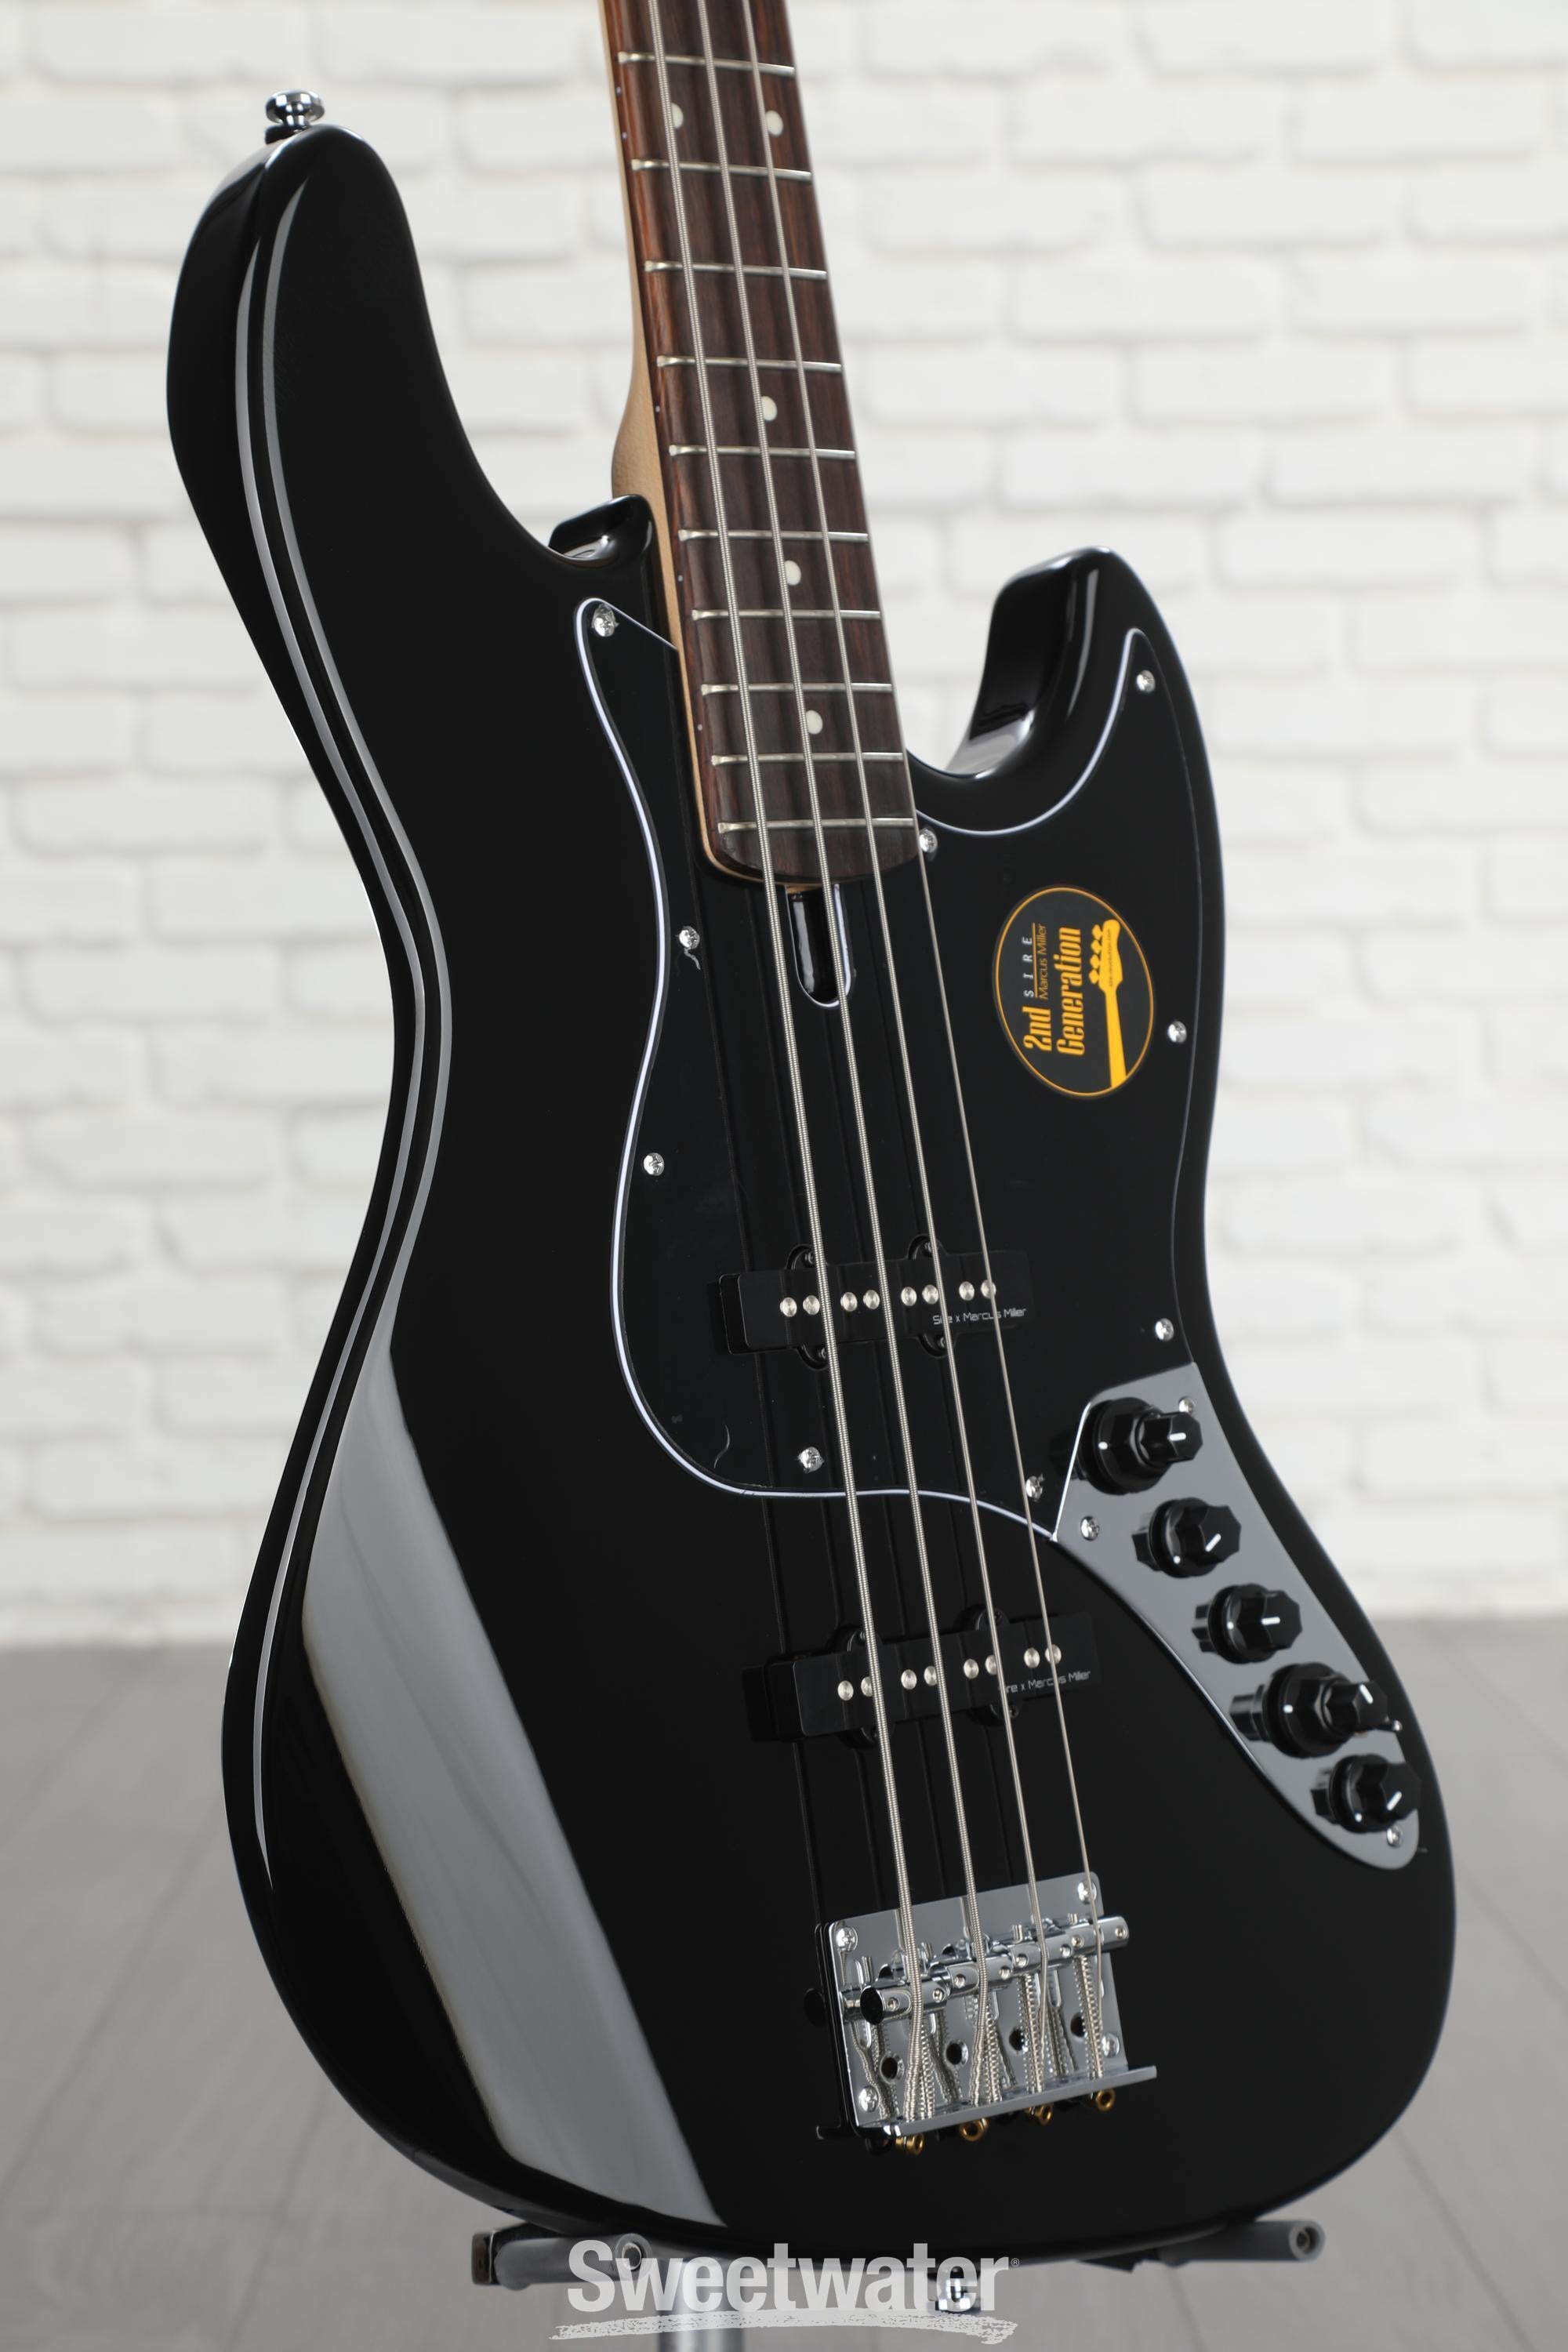 Sire Marcus Miller V3 4-string Bass Guitar - Black | Sweetwater